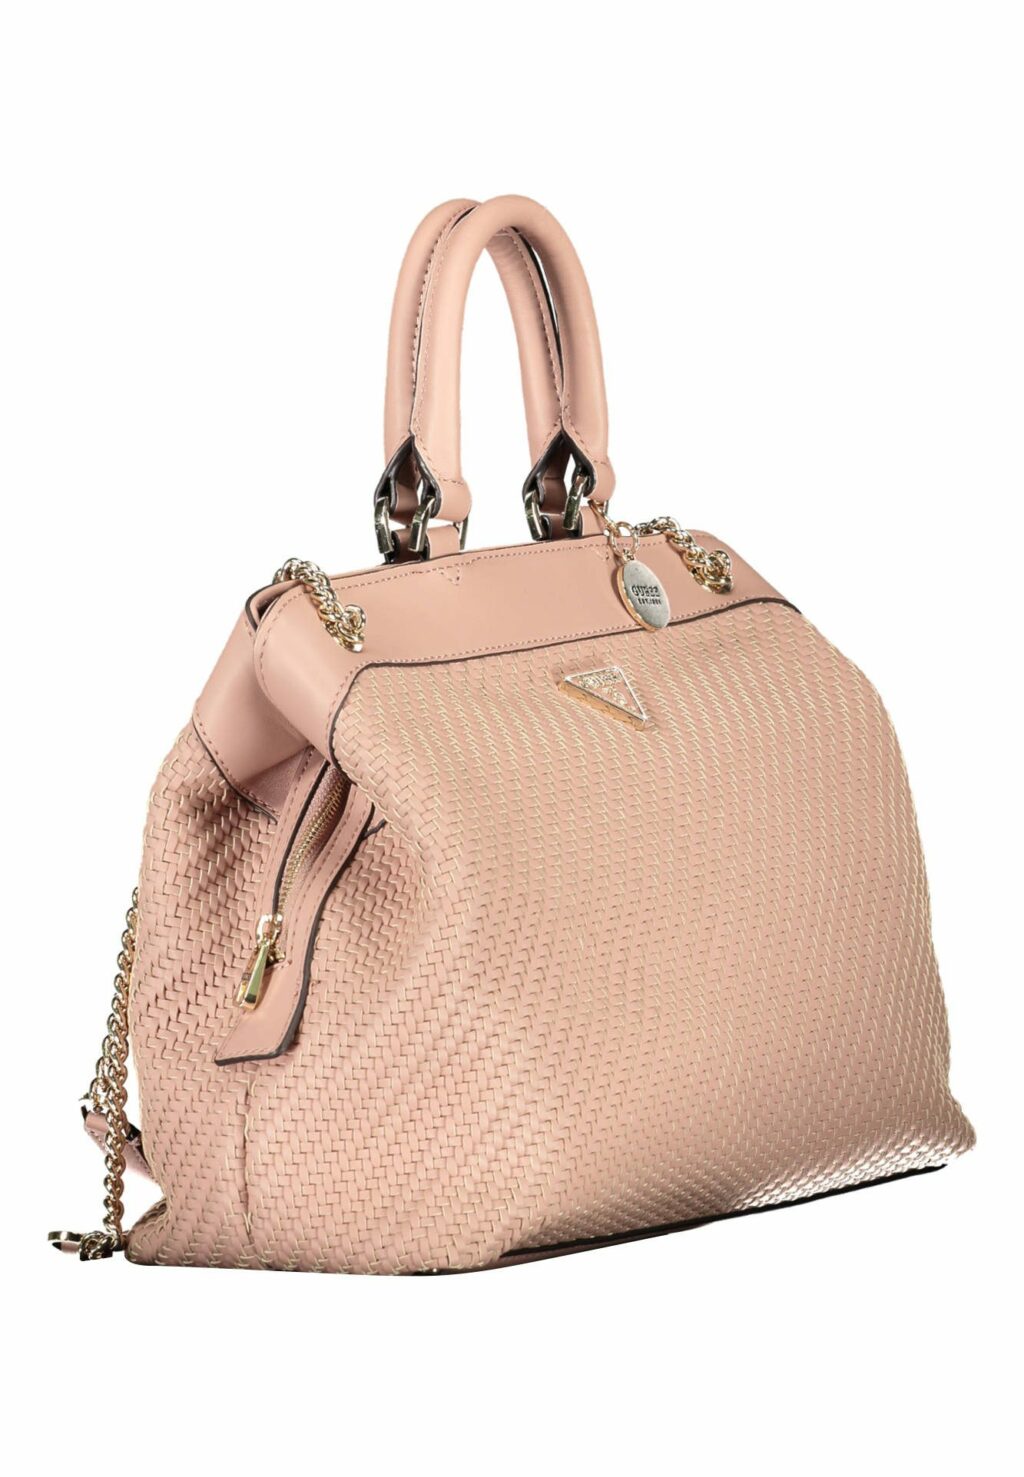 GUESS JEANS WOMEN'S BAG PINK VG839723_ROSA_ROSEWOOD